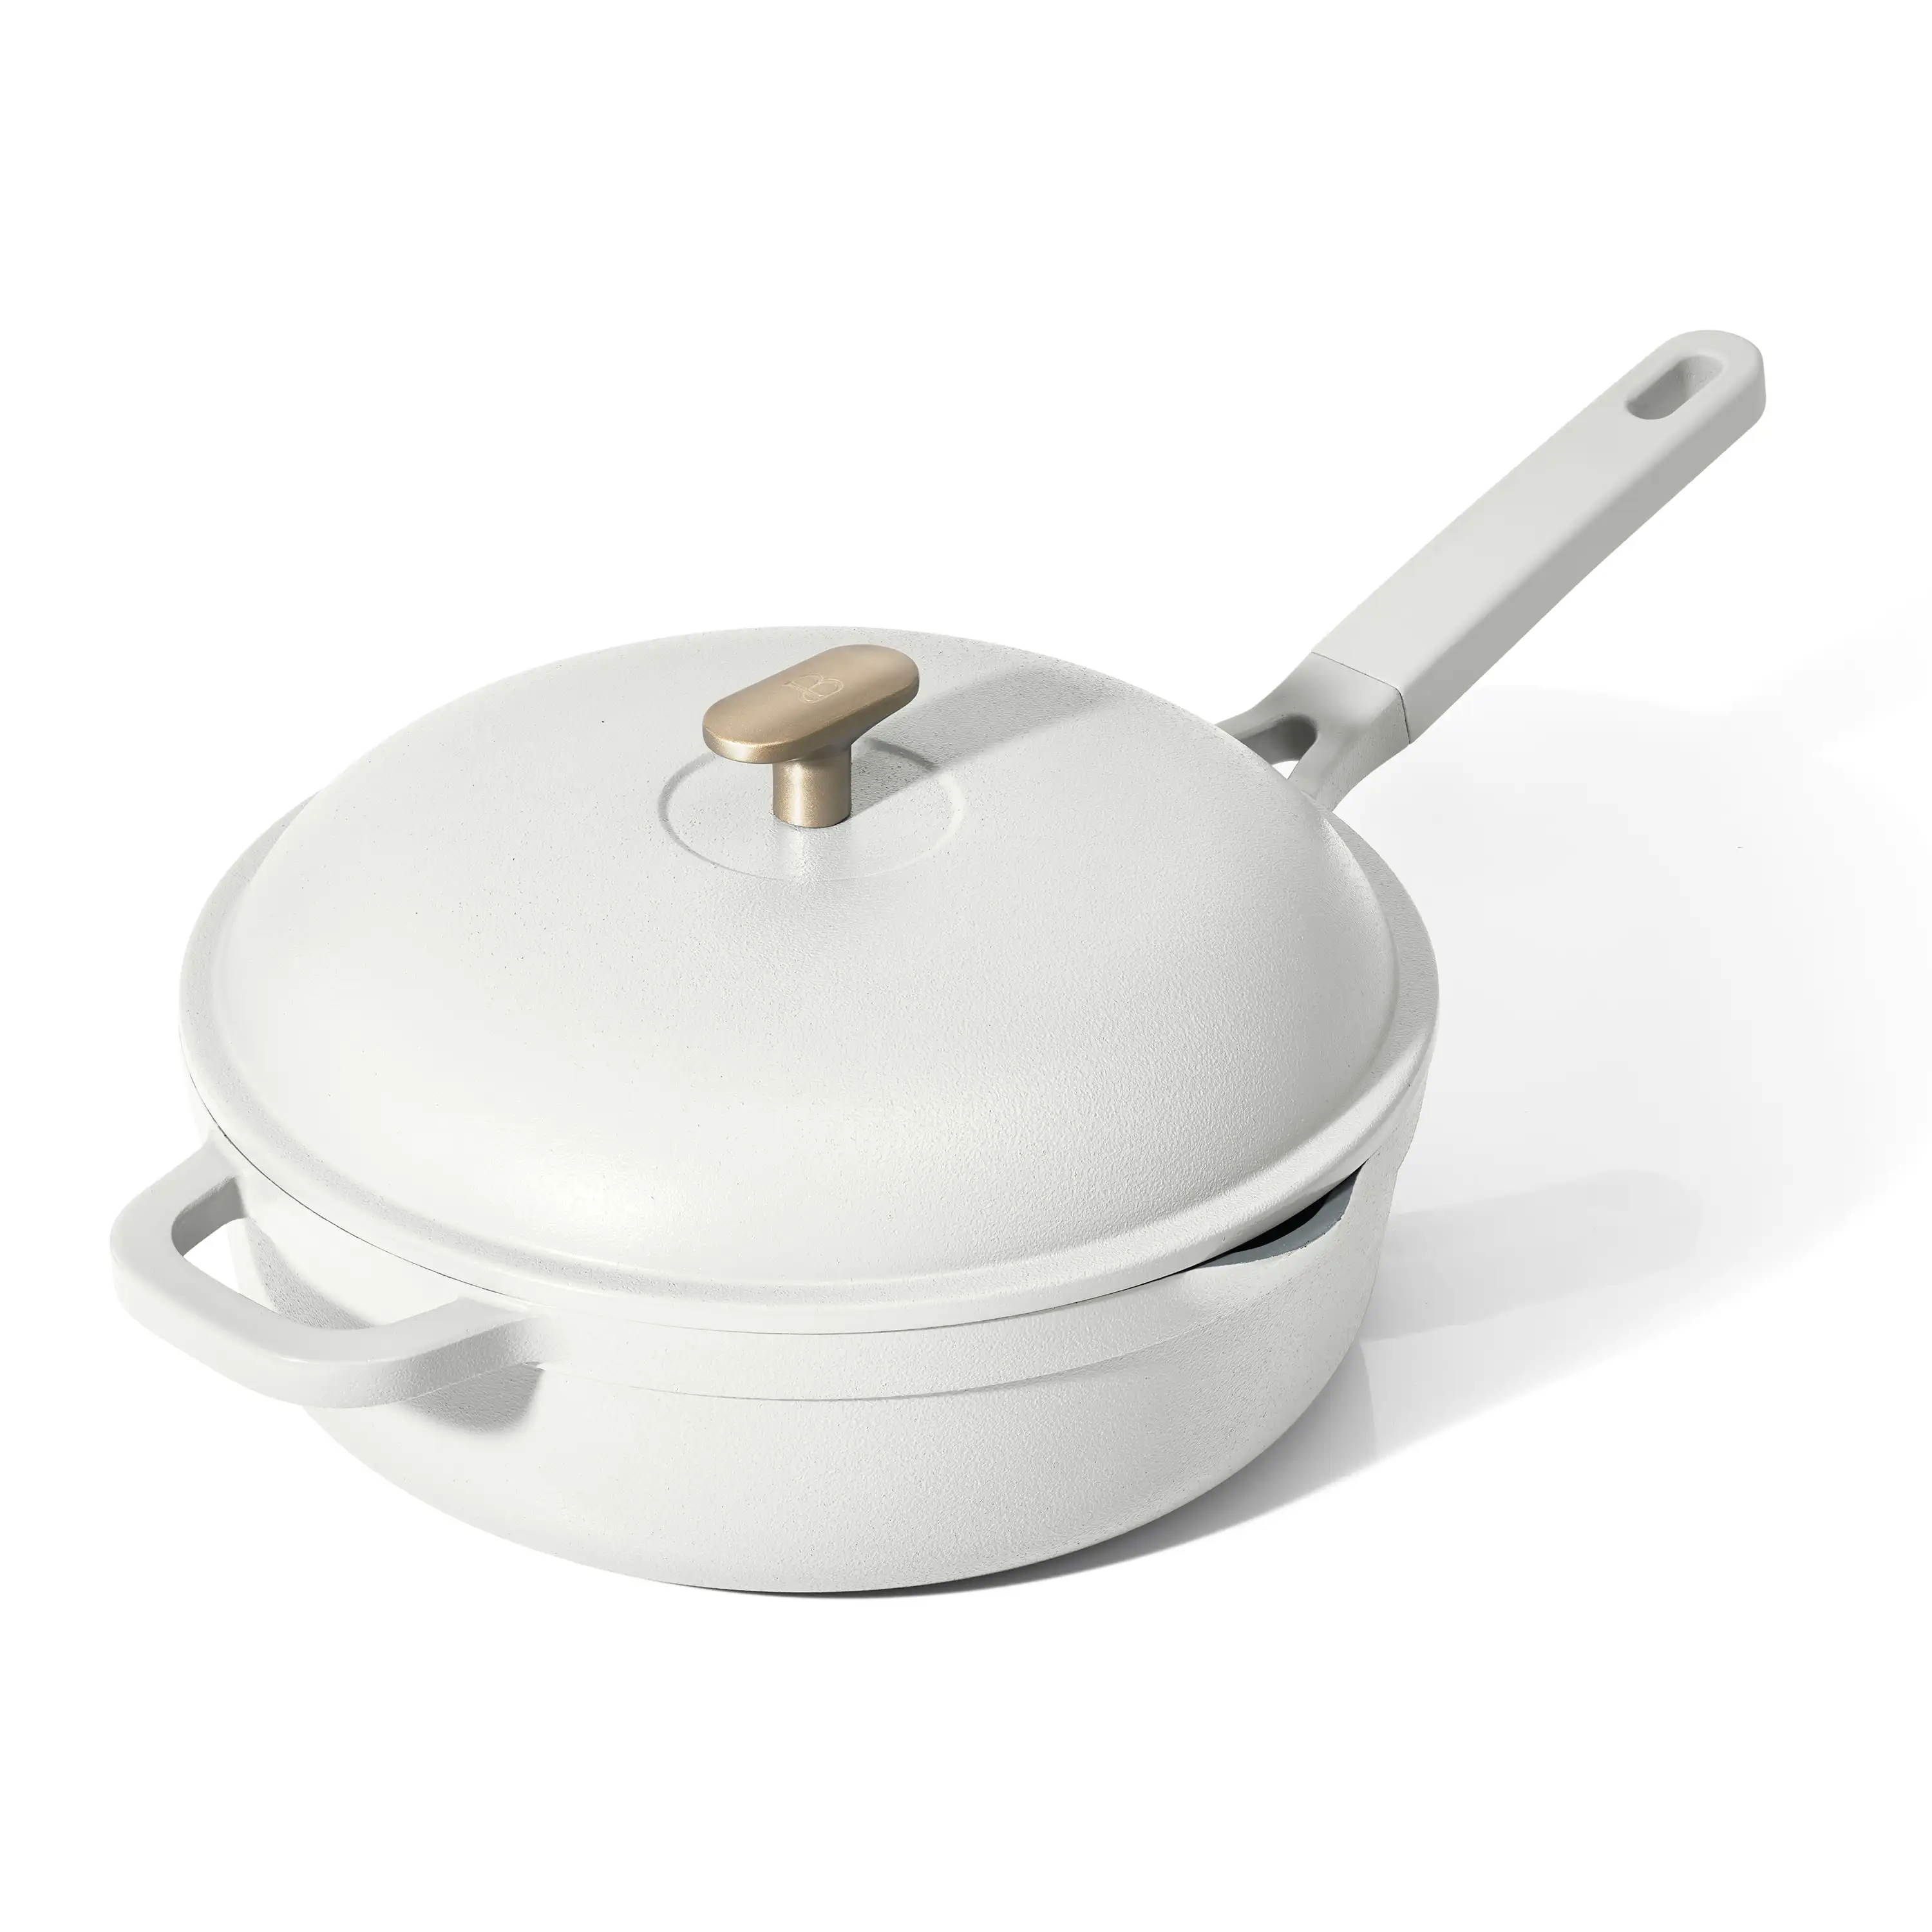 

Beautiful 4QT Hero Pan with Steam Insert, 3pc Set, White Icing by Drew Barrymore